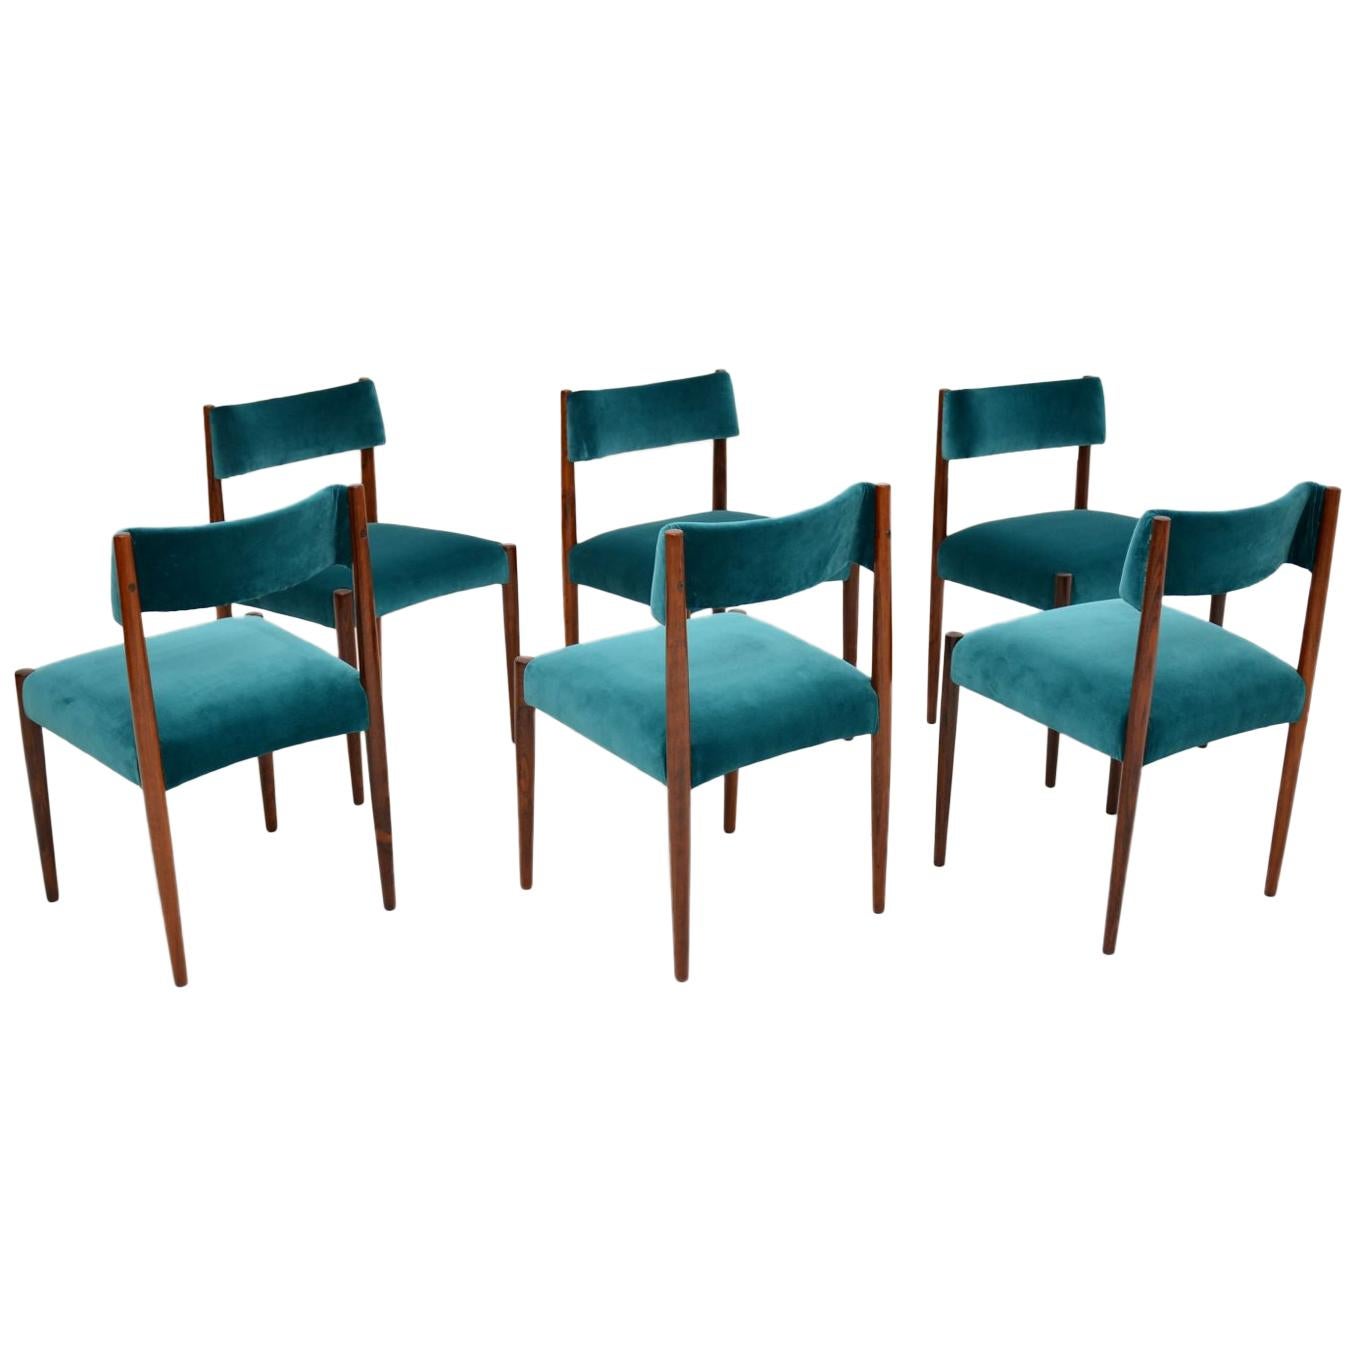 6 Vintage Dining Chairs by Robert Heritage for Archie Shine